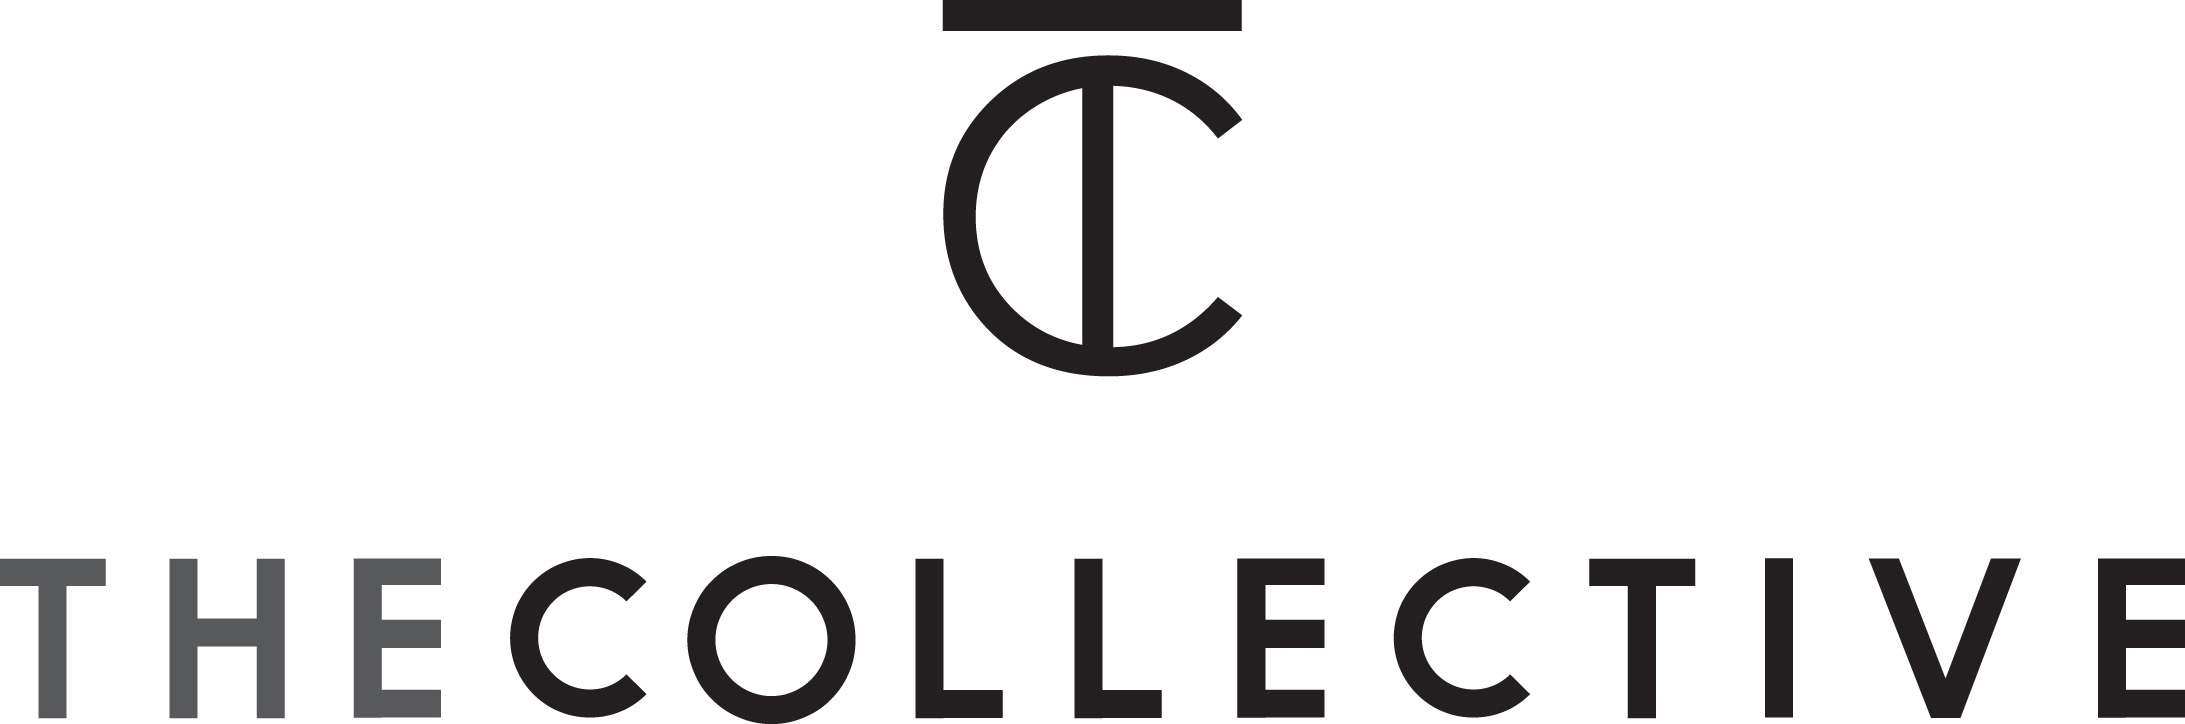 logo for The Collective Agency London Limited